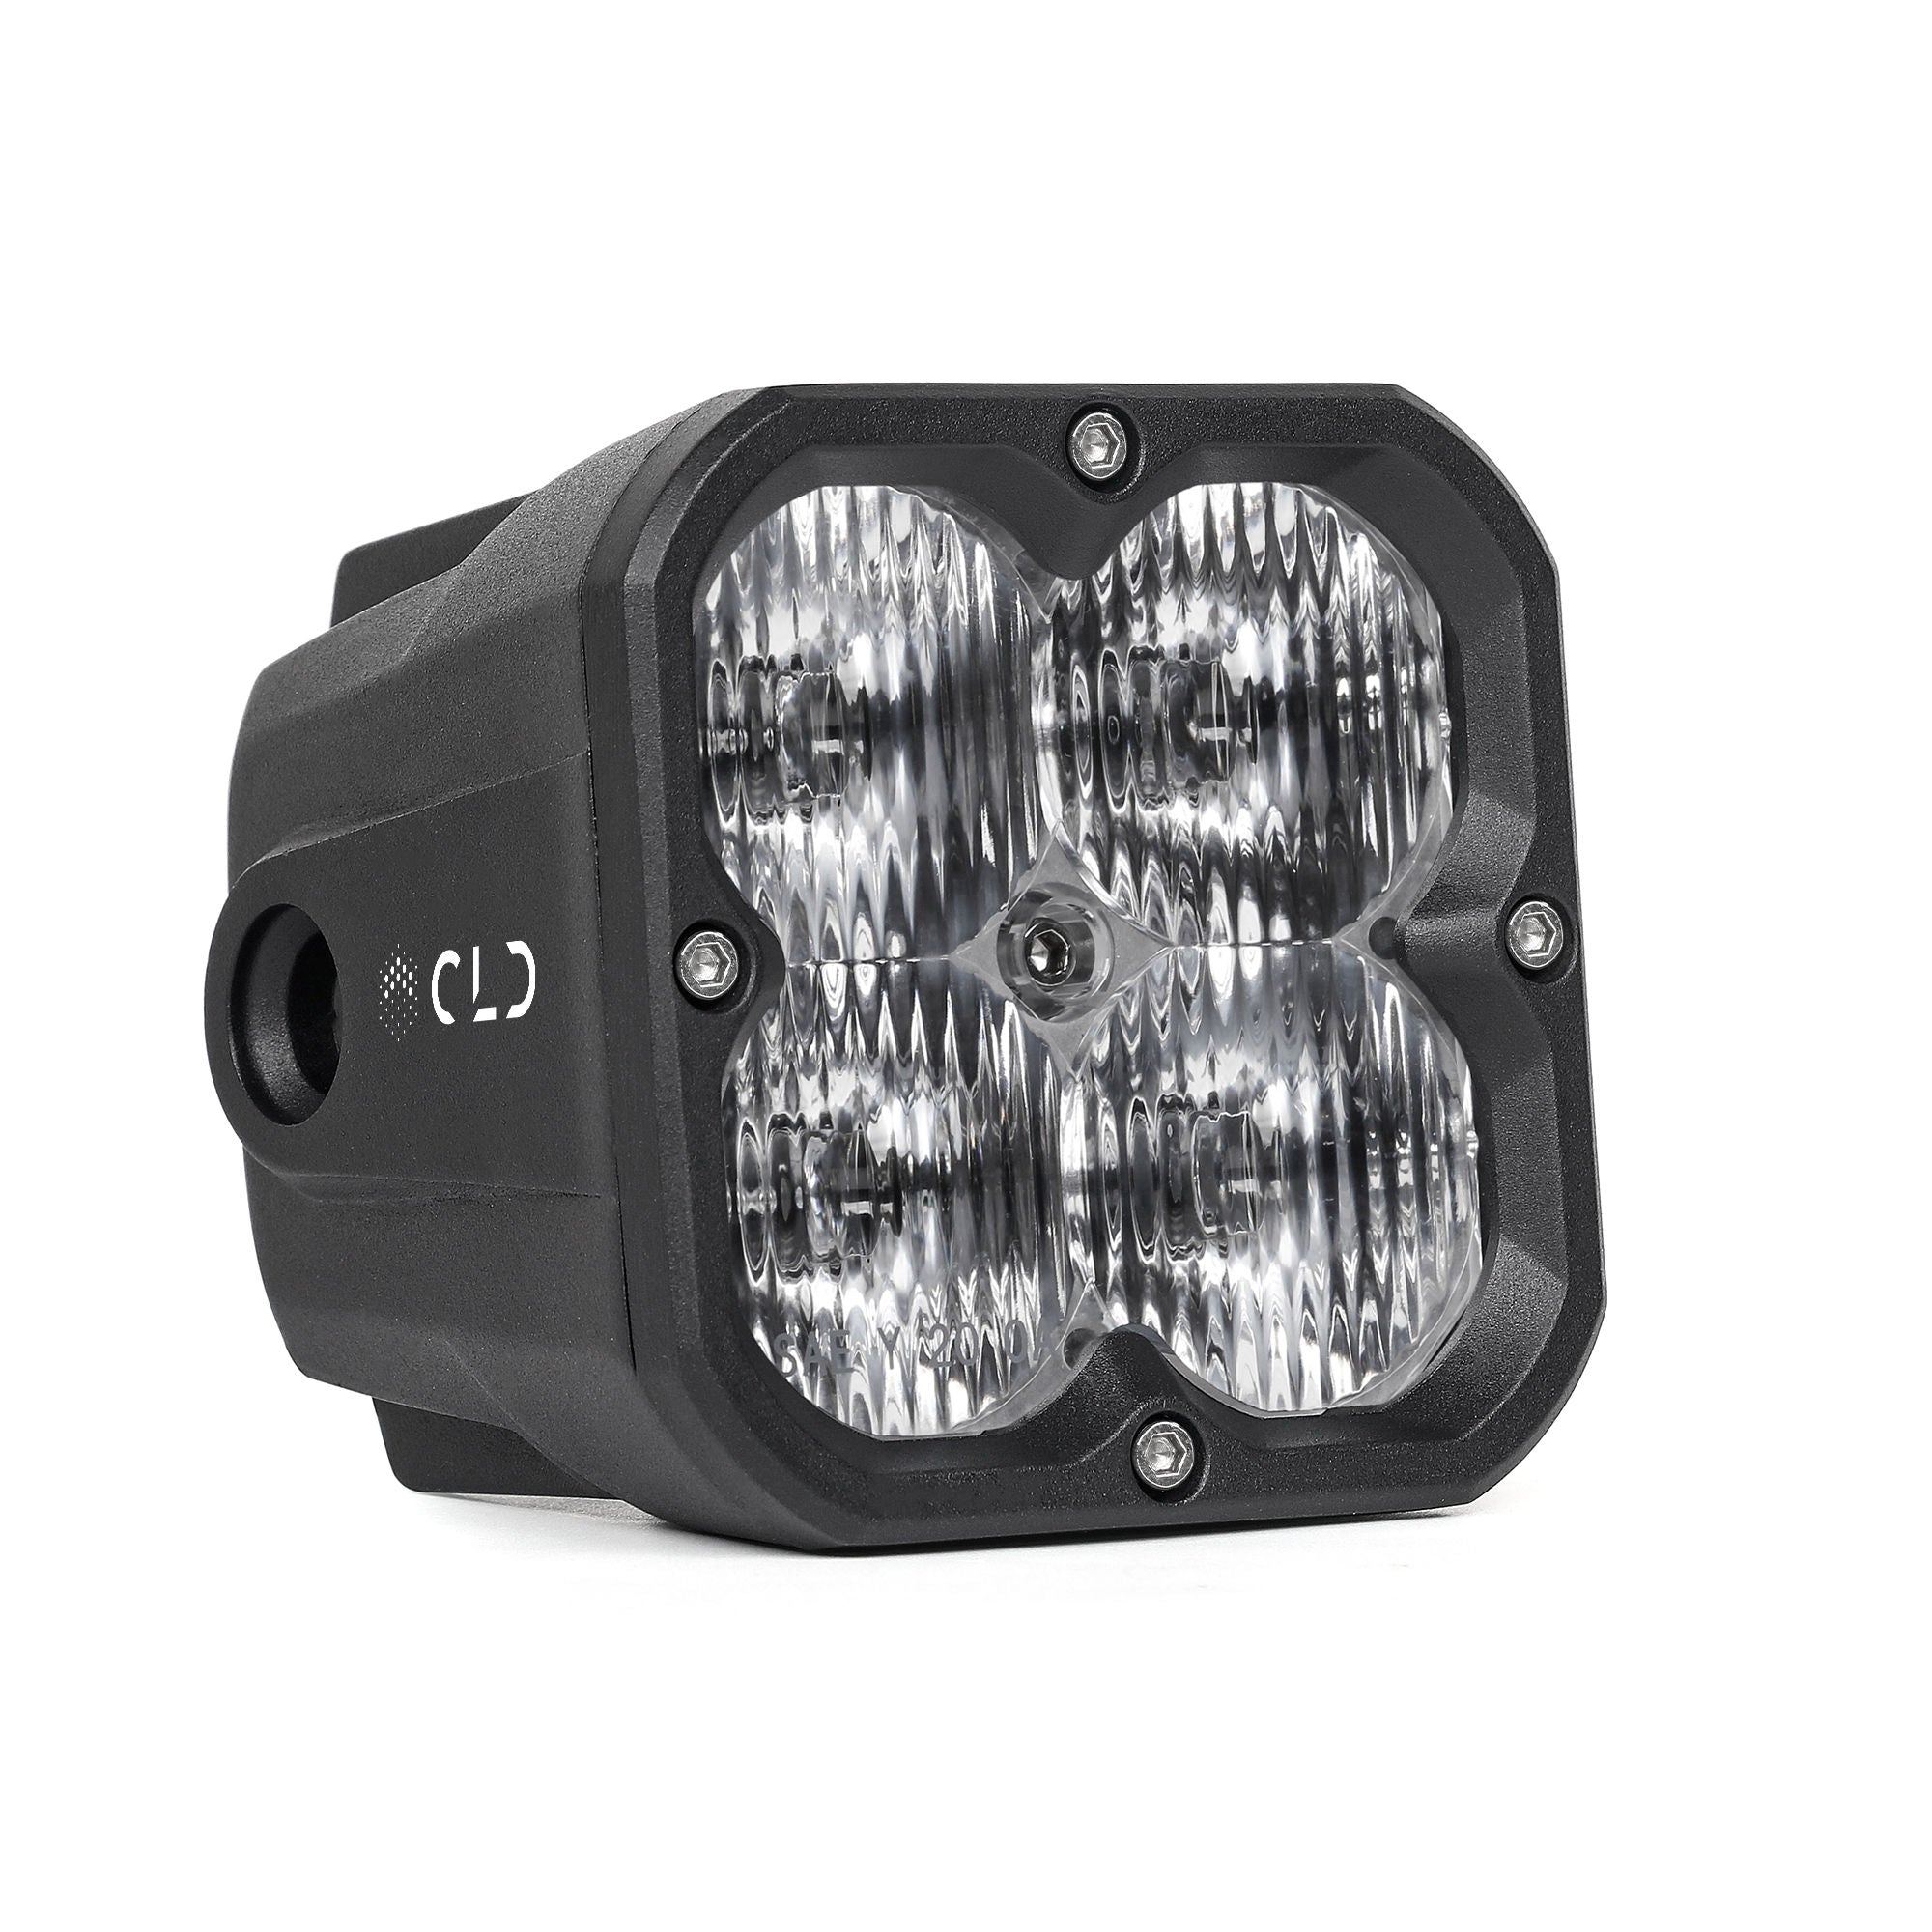 CLD CLDPCHB - 3" Street Legal LED Pod Light - Auxiliary Square High Beam (914 Lumens)